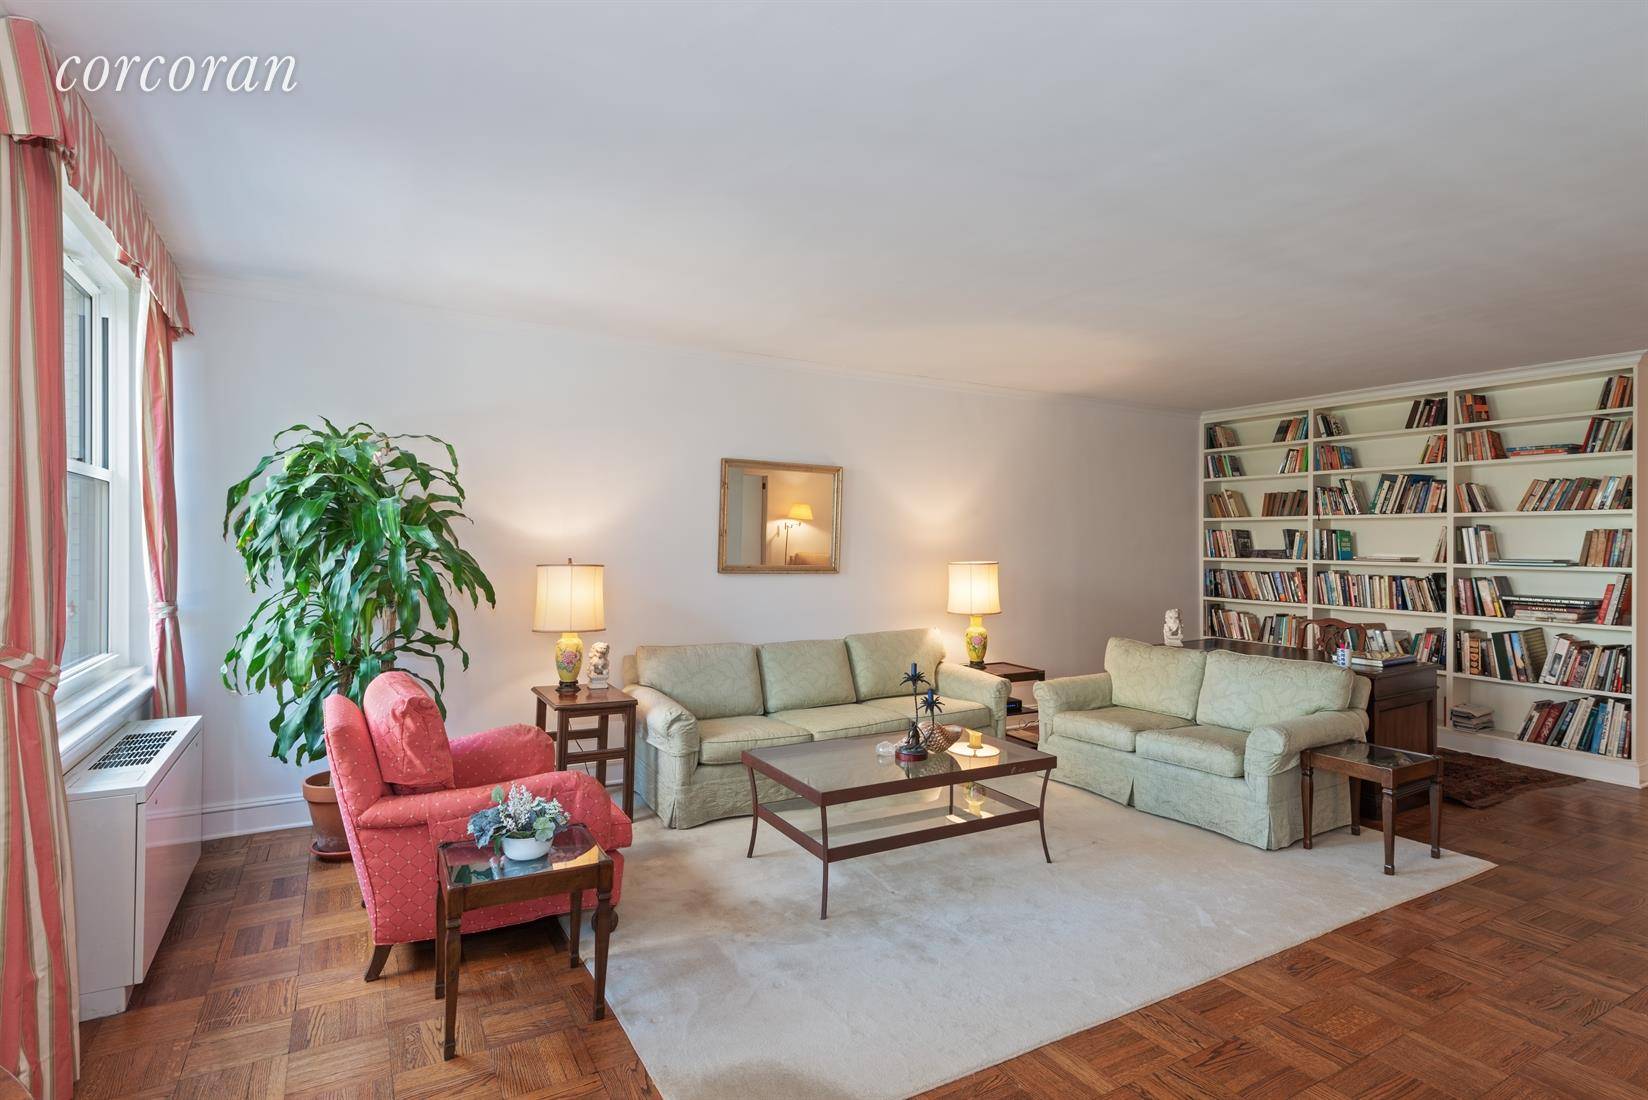 This expansive and charming one bedroom apartment, with one full bath plus a generous powder room, is on the corner of 71st Street and Third Avenue.